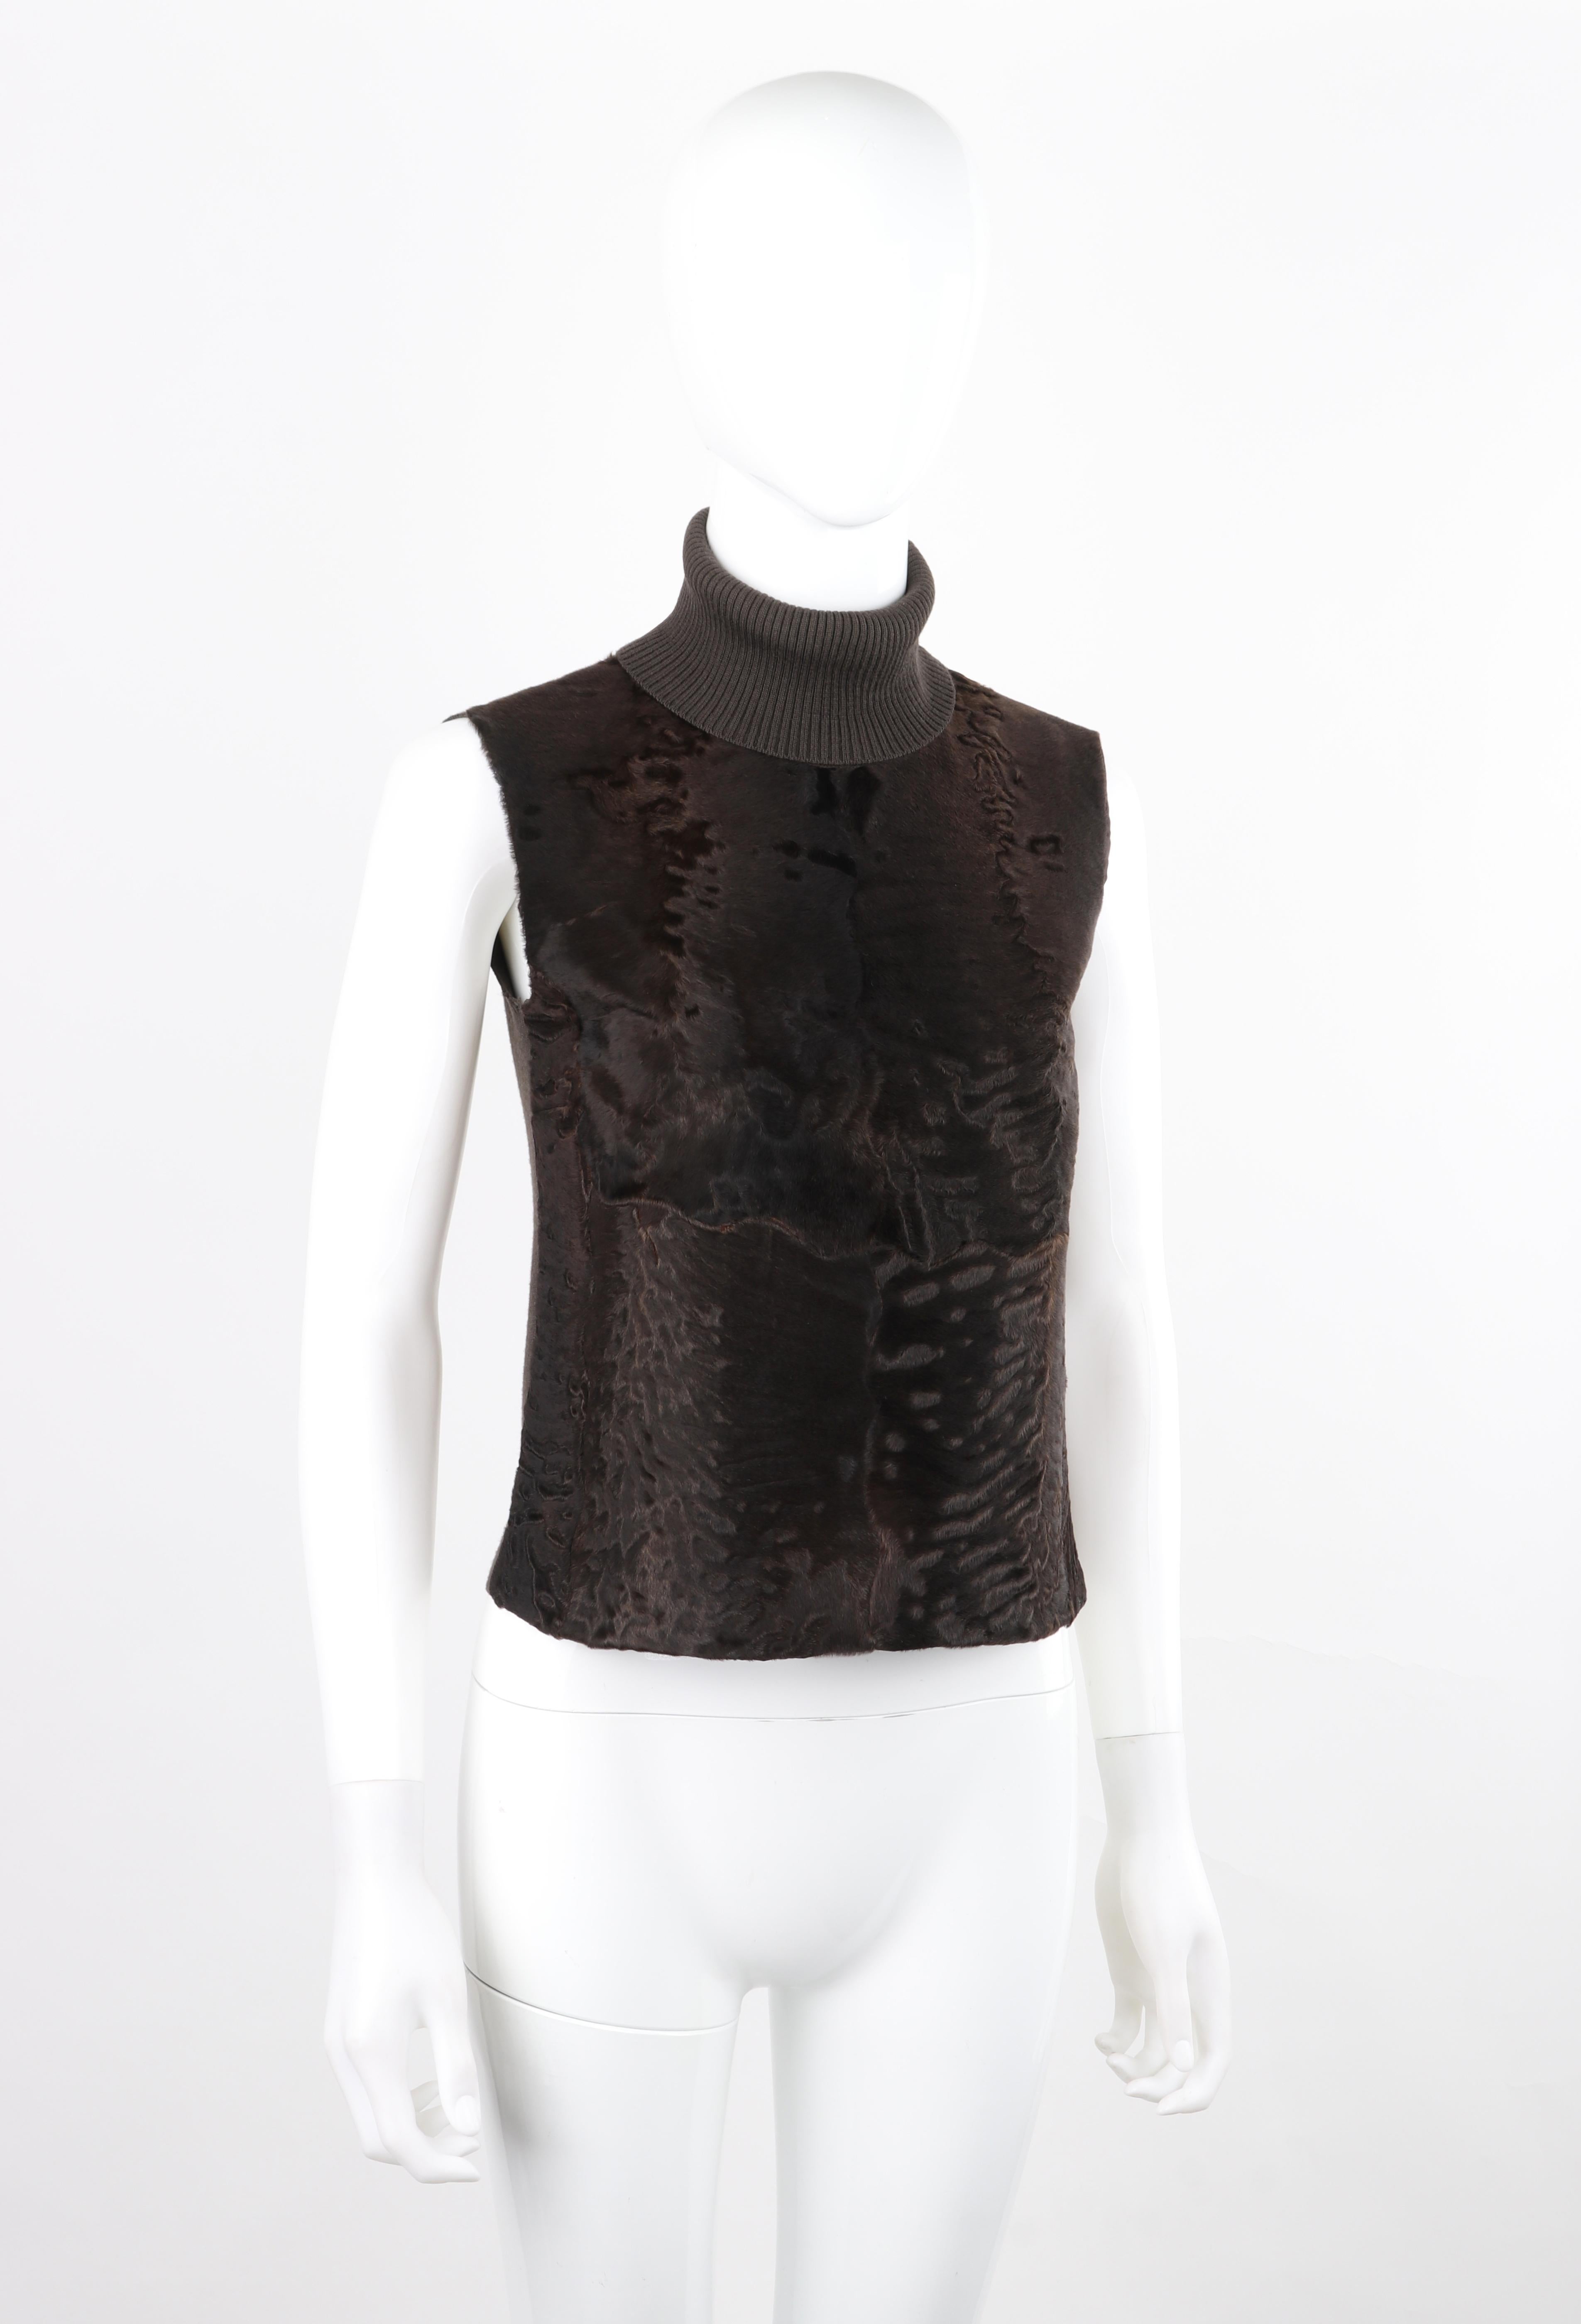 PRADA c.1990's Brown Knit Wool Dyed Lamb Fur Sleeveless Pullover Turtleneck Top In Good Condition For Sale In Thiensville, WI